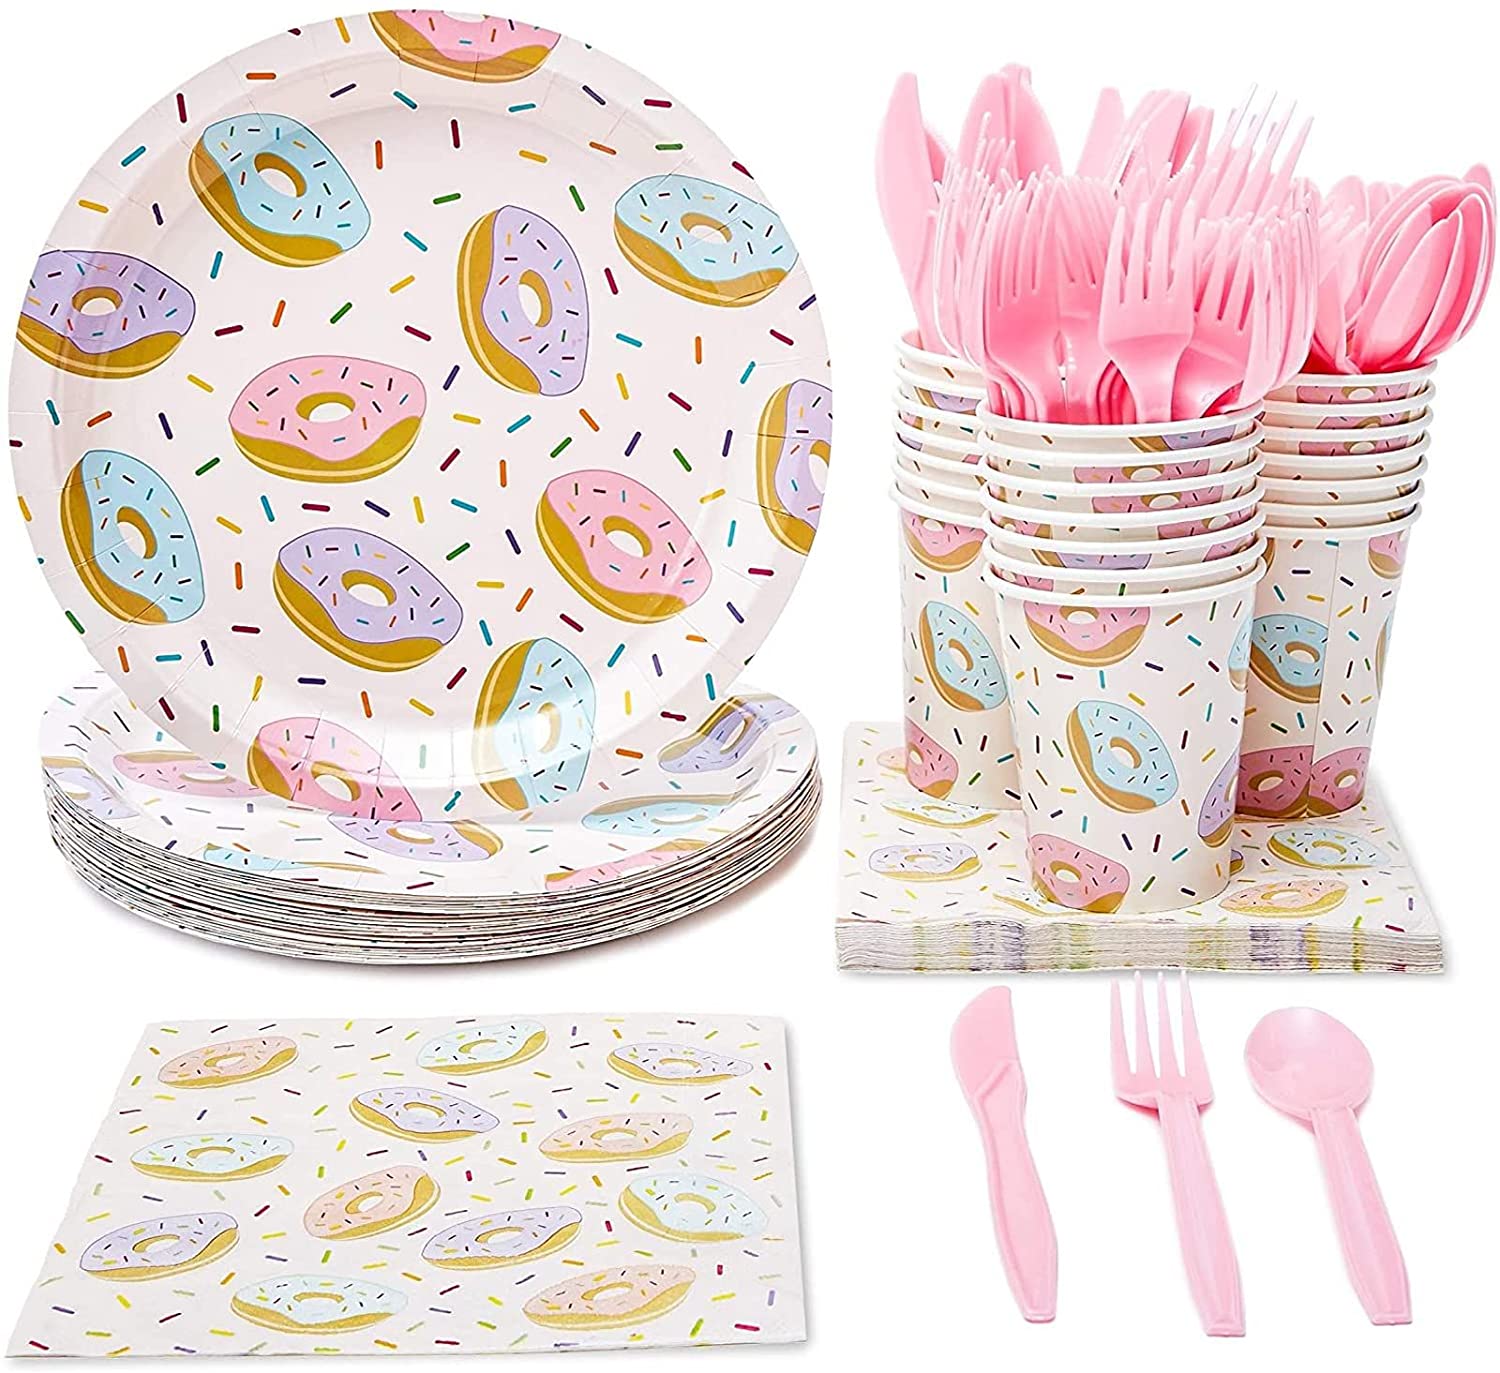 Donut cutlery and plates